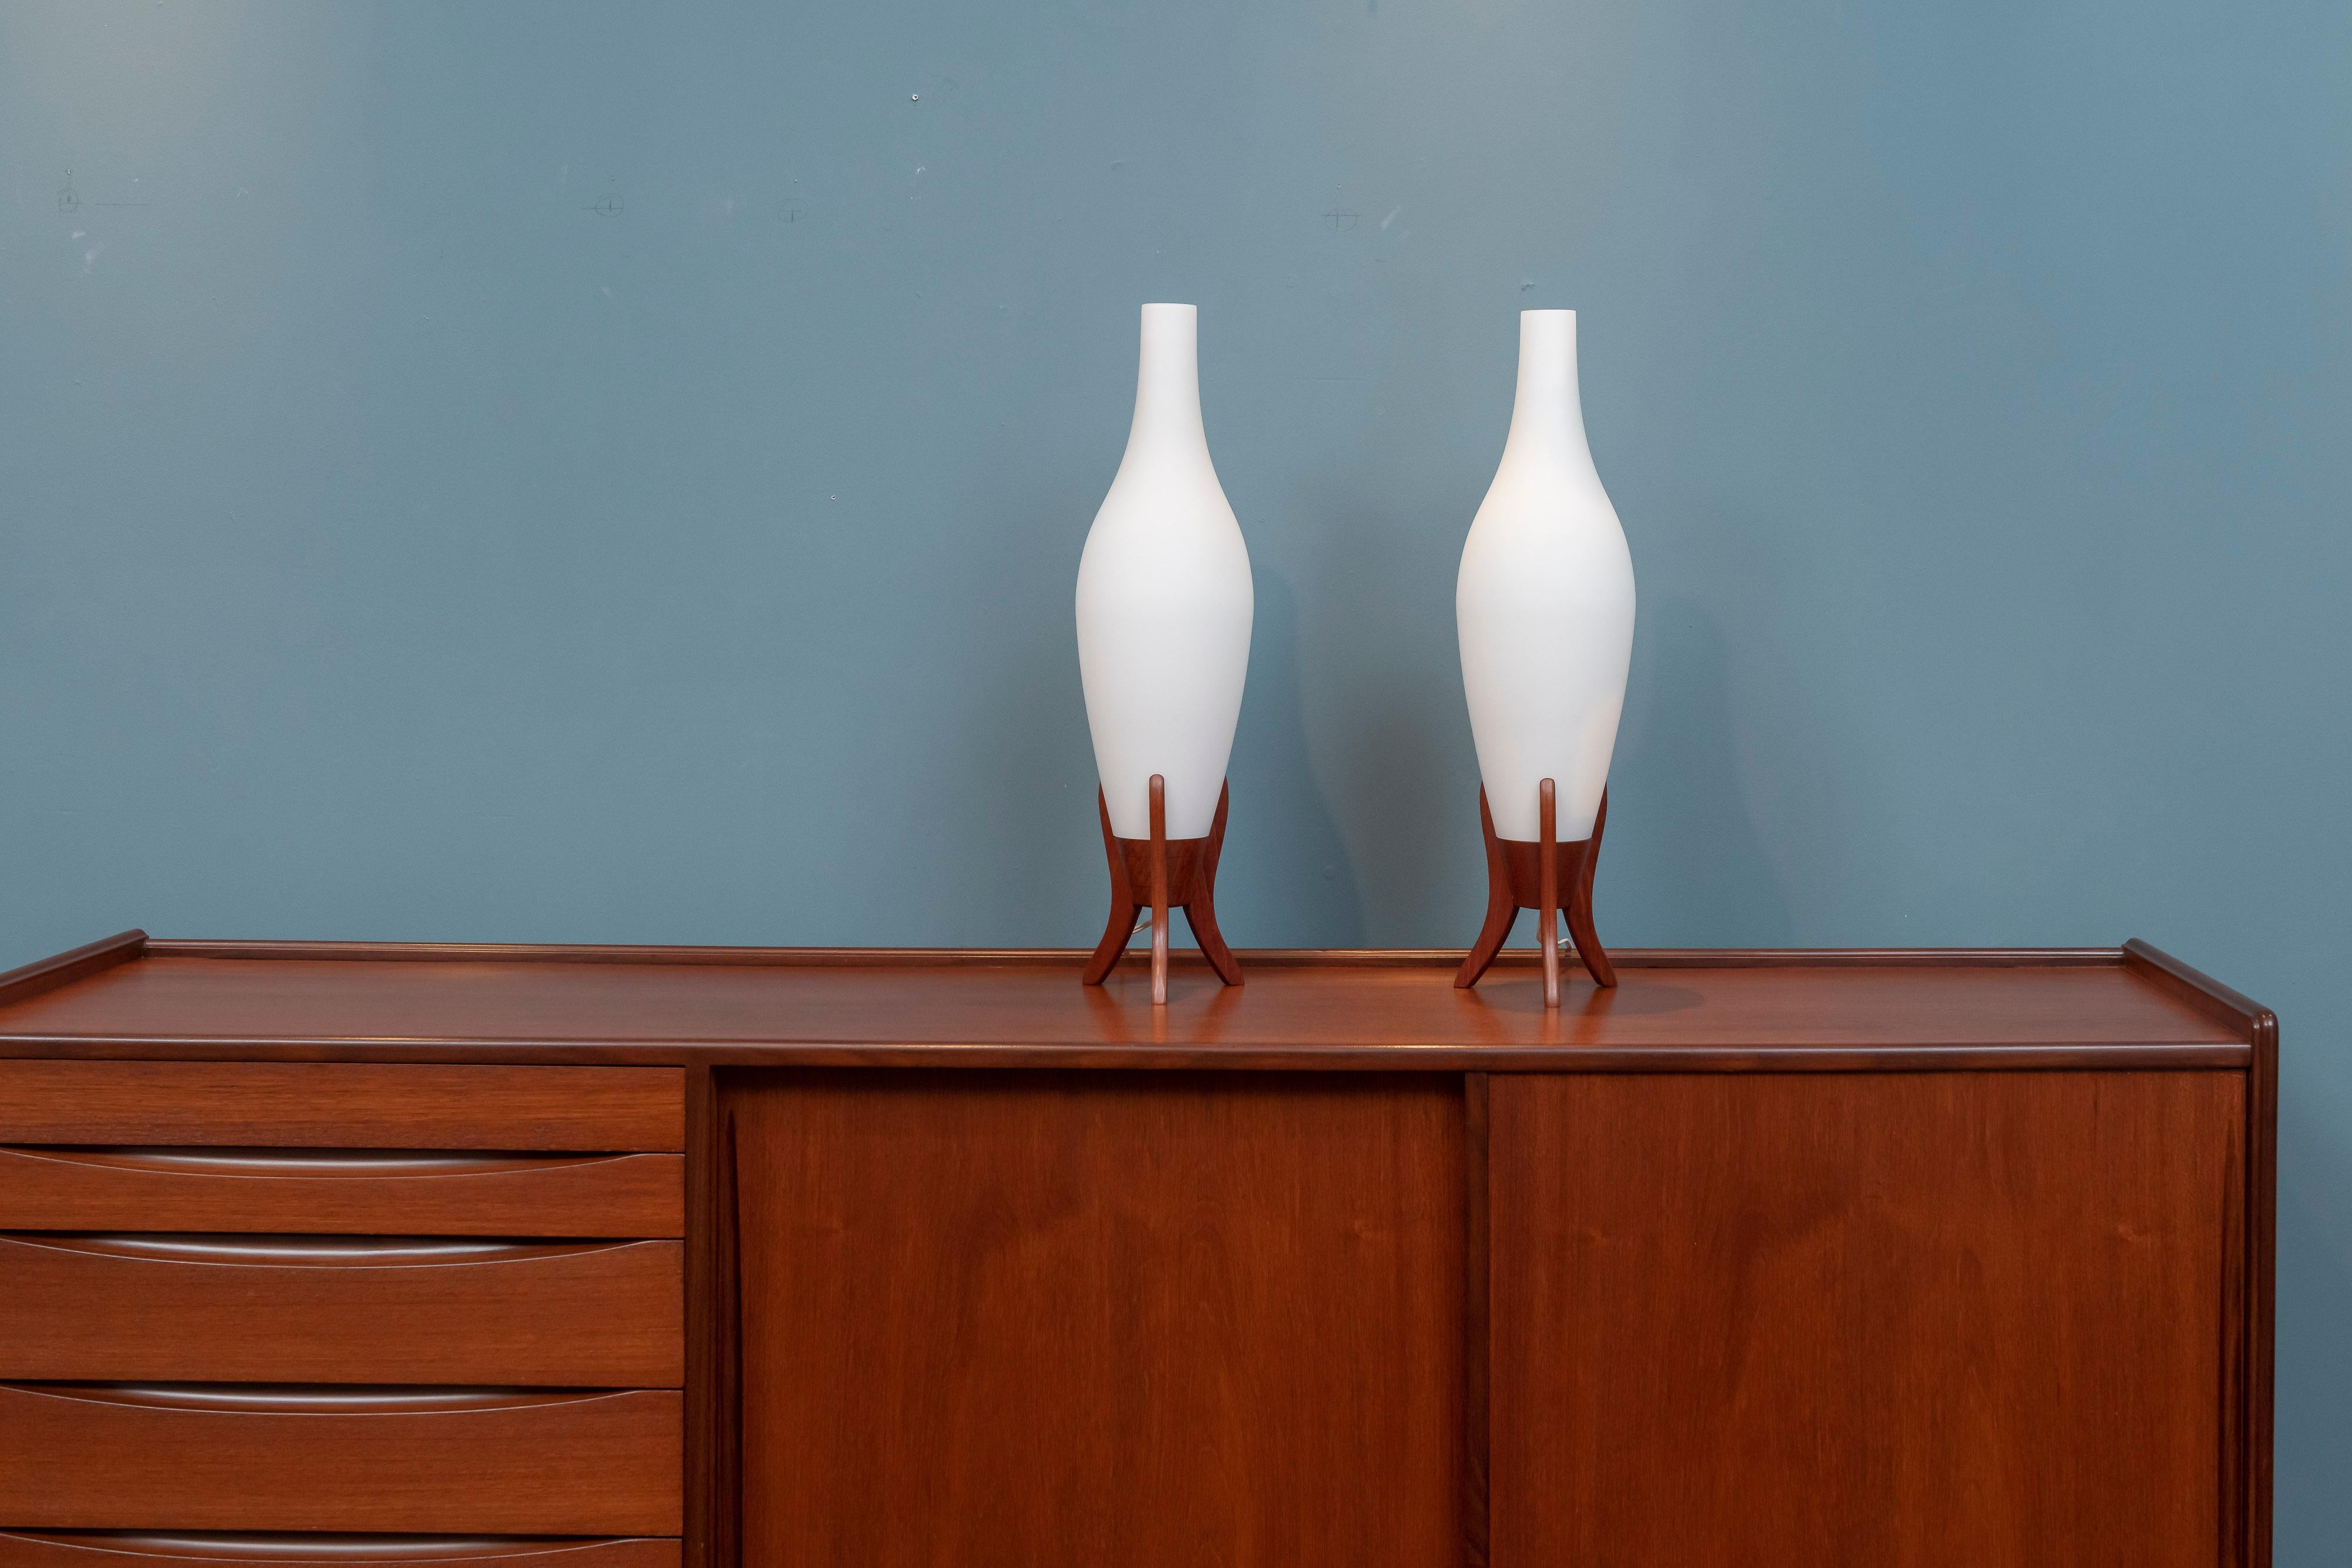 Scandinavian Modern frosted glass and teak table lamps, Sweden. Tall and elegant design lamps that put out a wonderful soft glowing light in very good original condition.